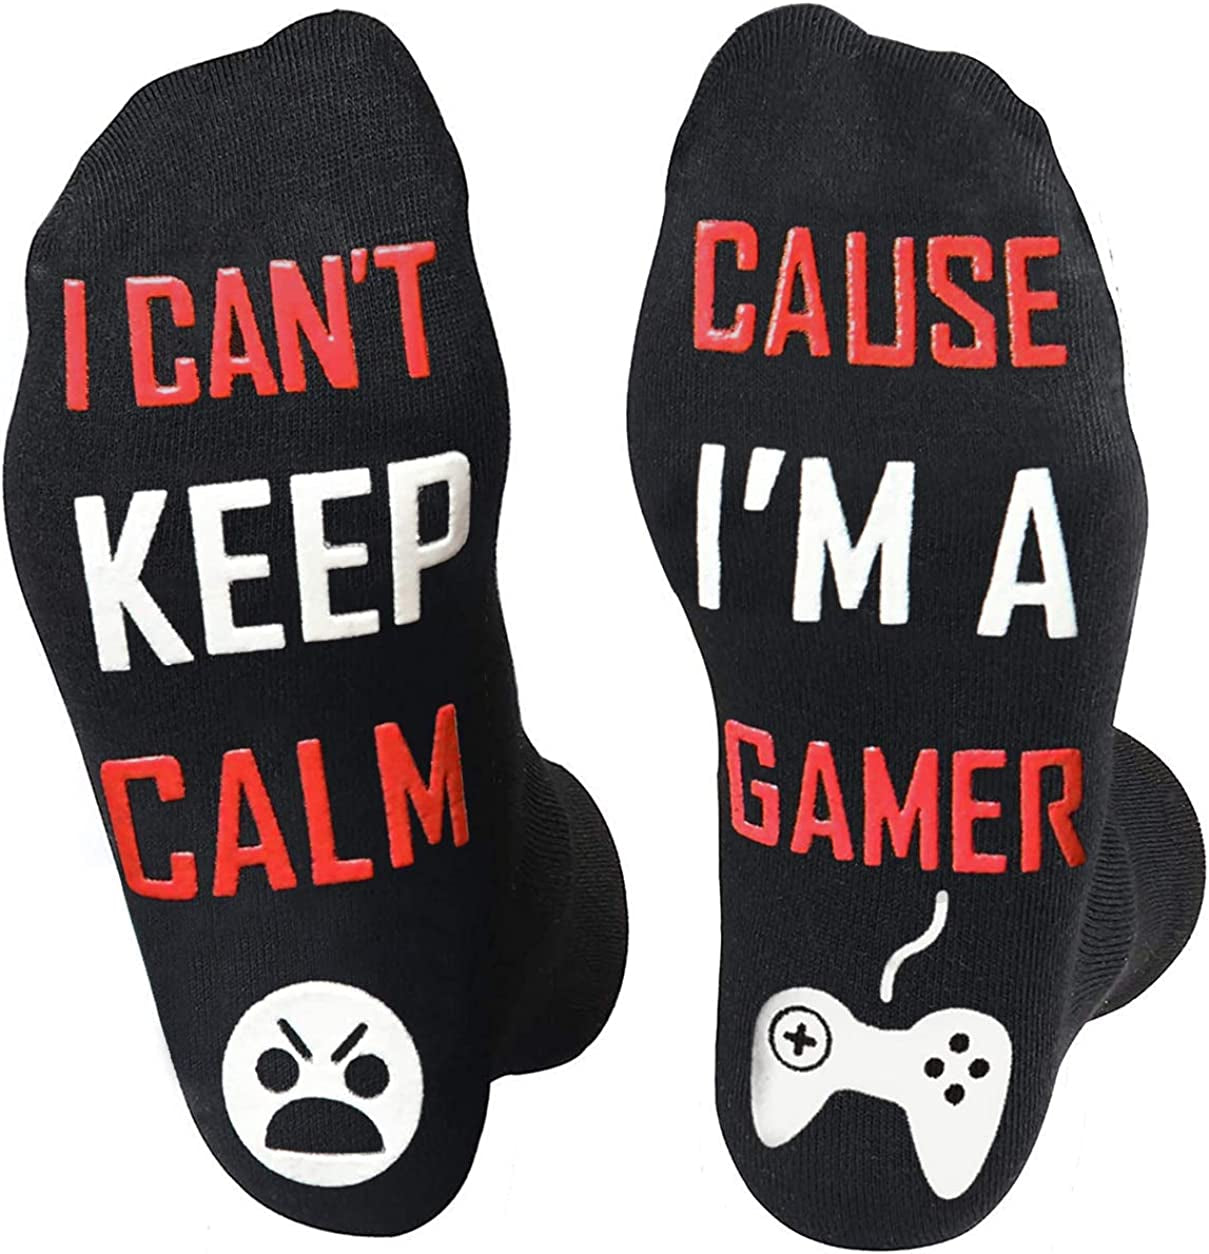  Gifts for Dad,Novelty Gaming Socks Fathers Day Gift from Son,Funny Socks Gift Stocking Stuffers for Men,Dad,Teens